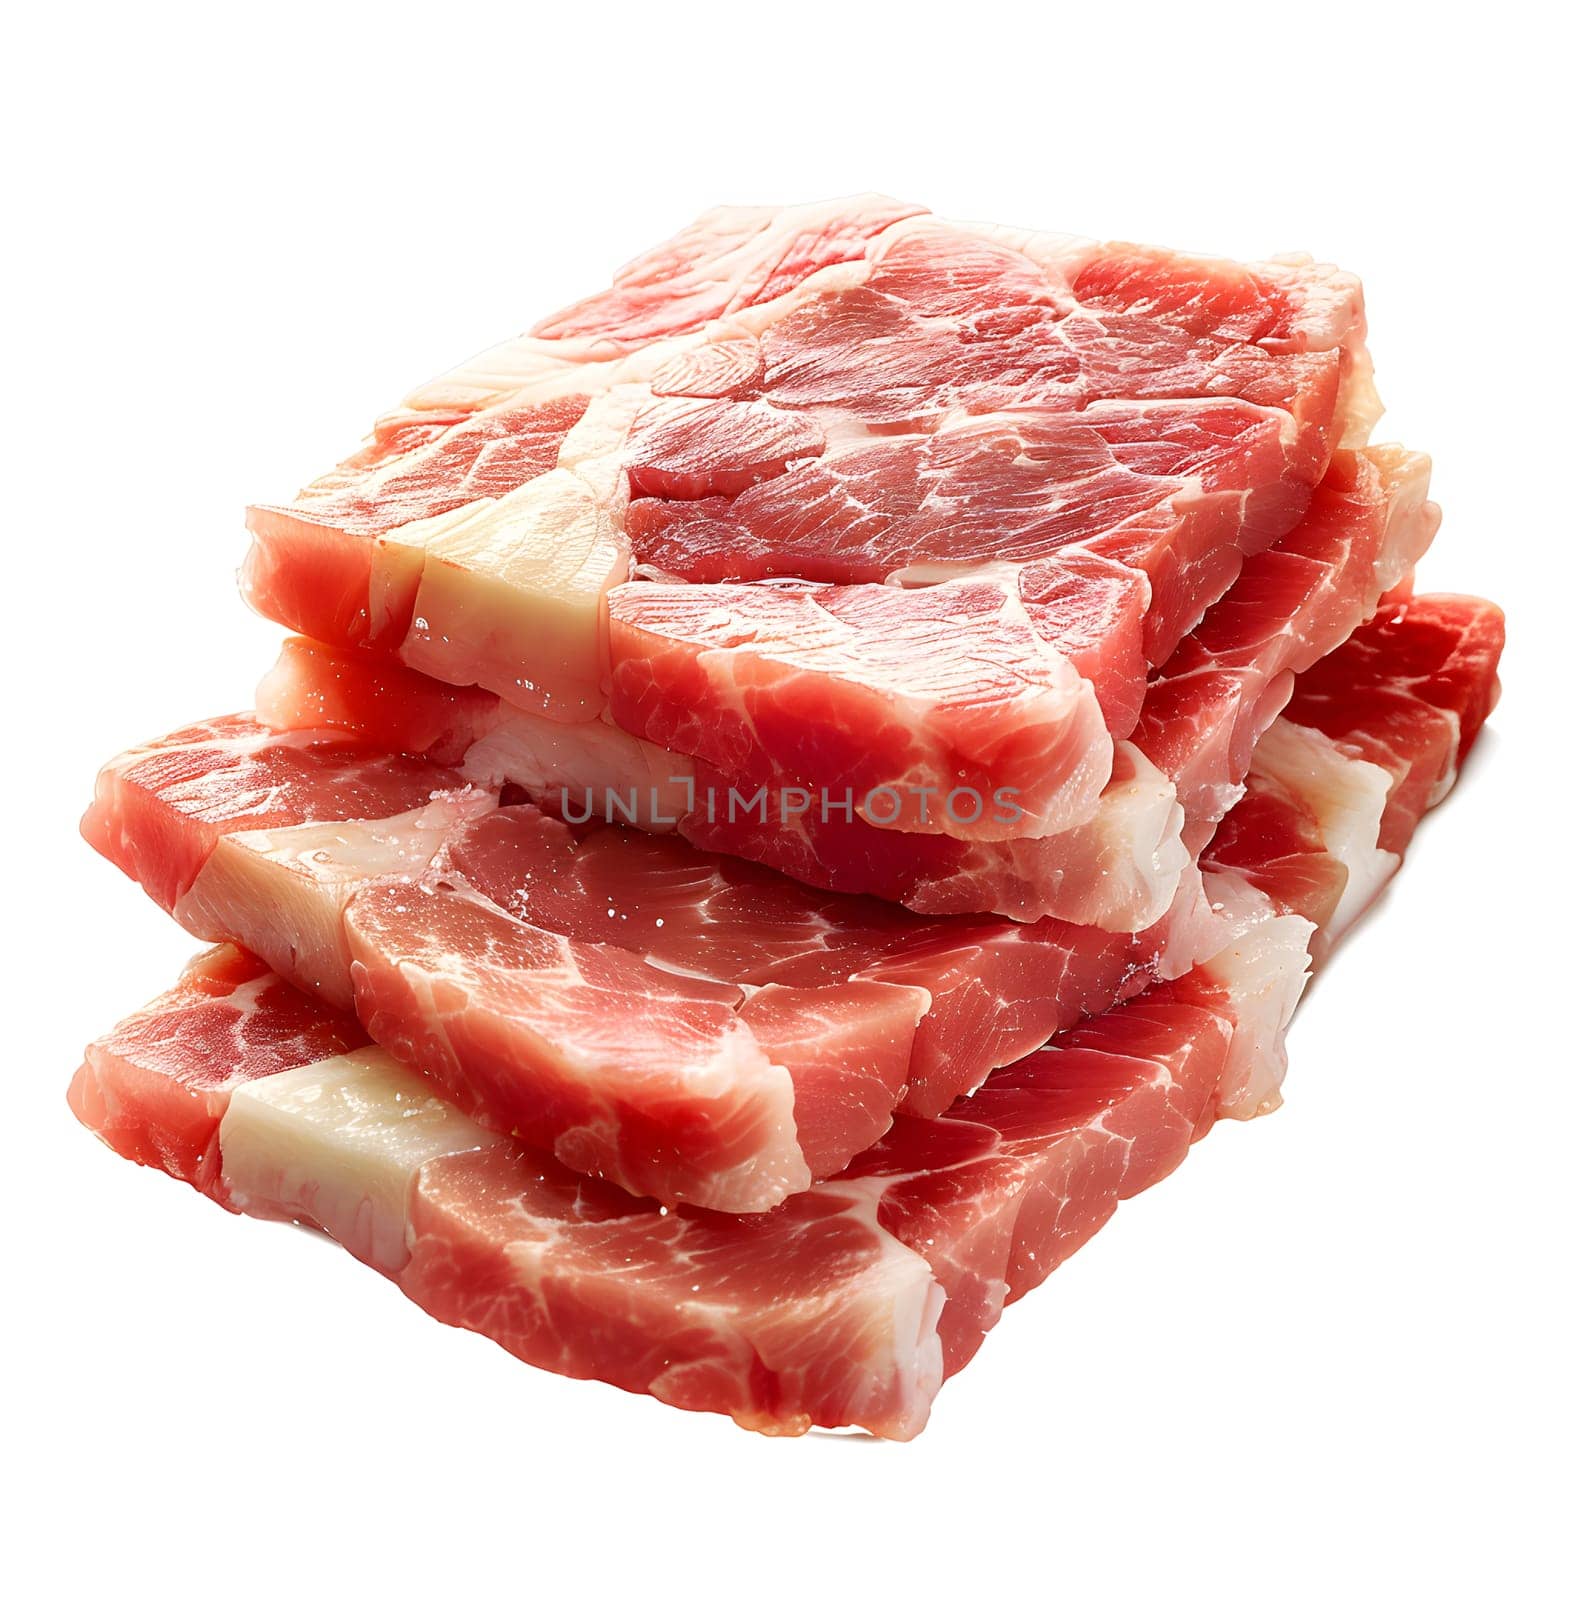 Three pieces of raw red meat stacked on top of each other, showcasing the quality of this animal product. Perfect for a delicious pork or beef recipe